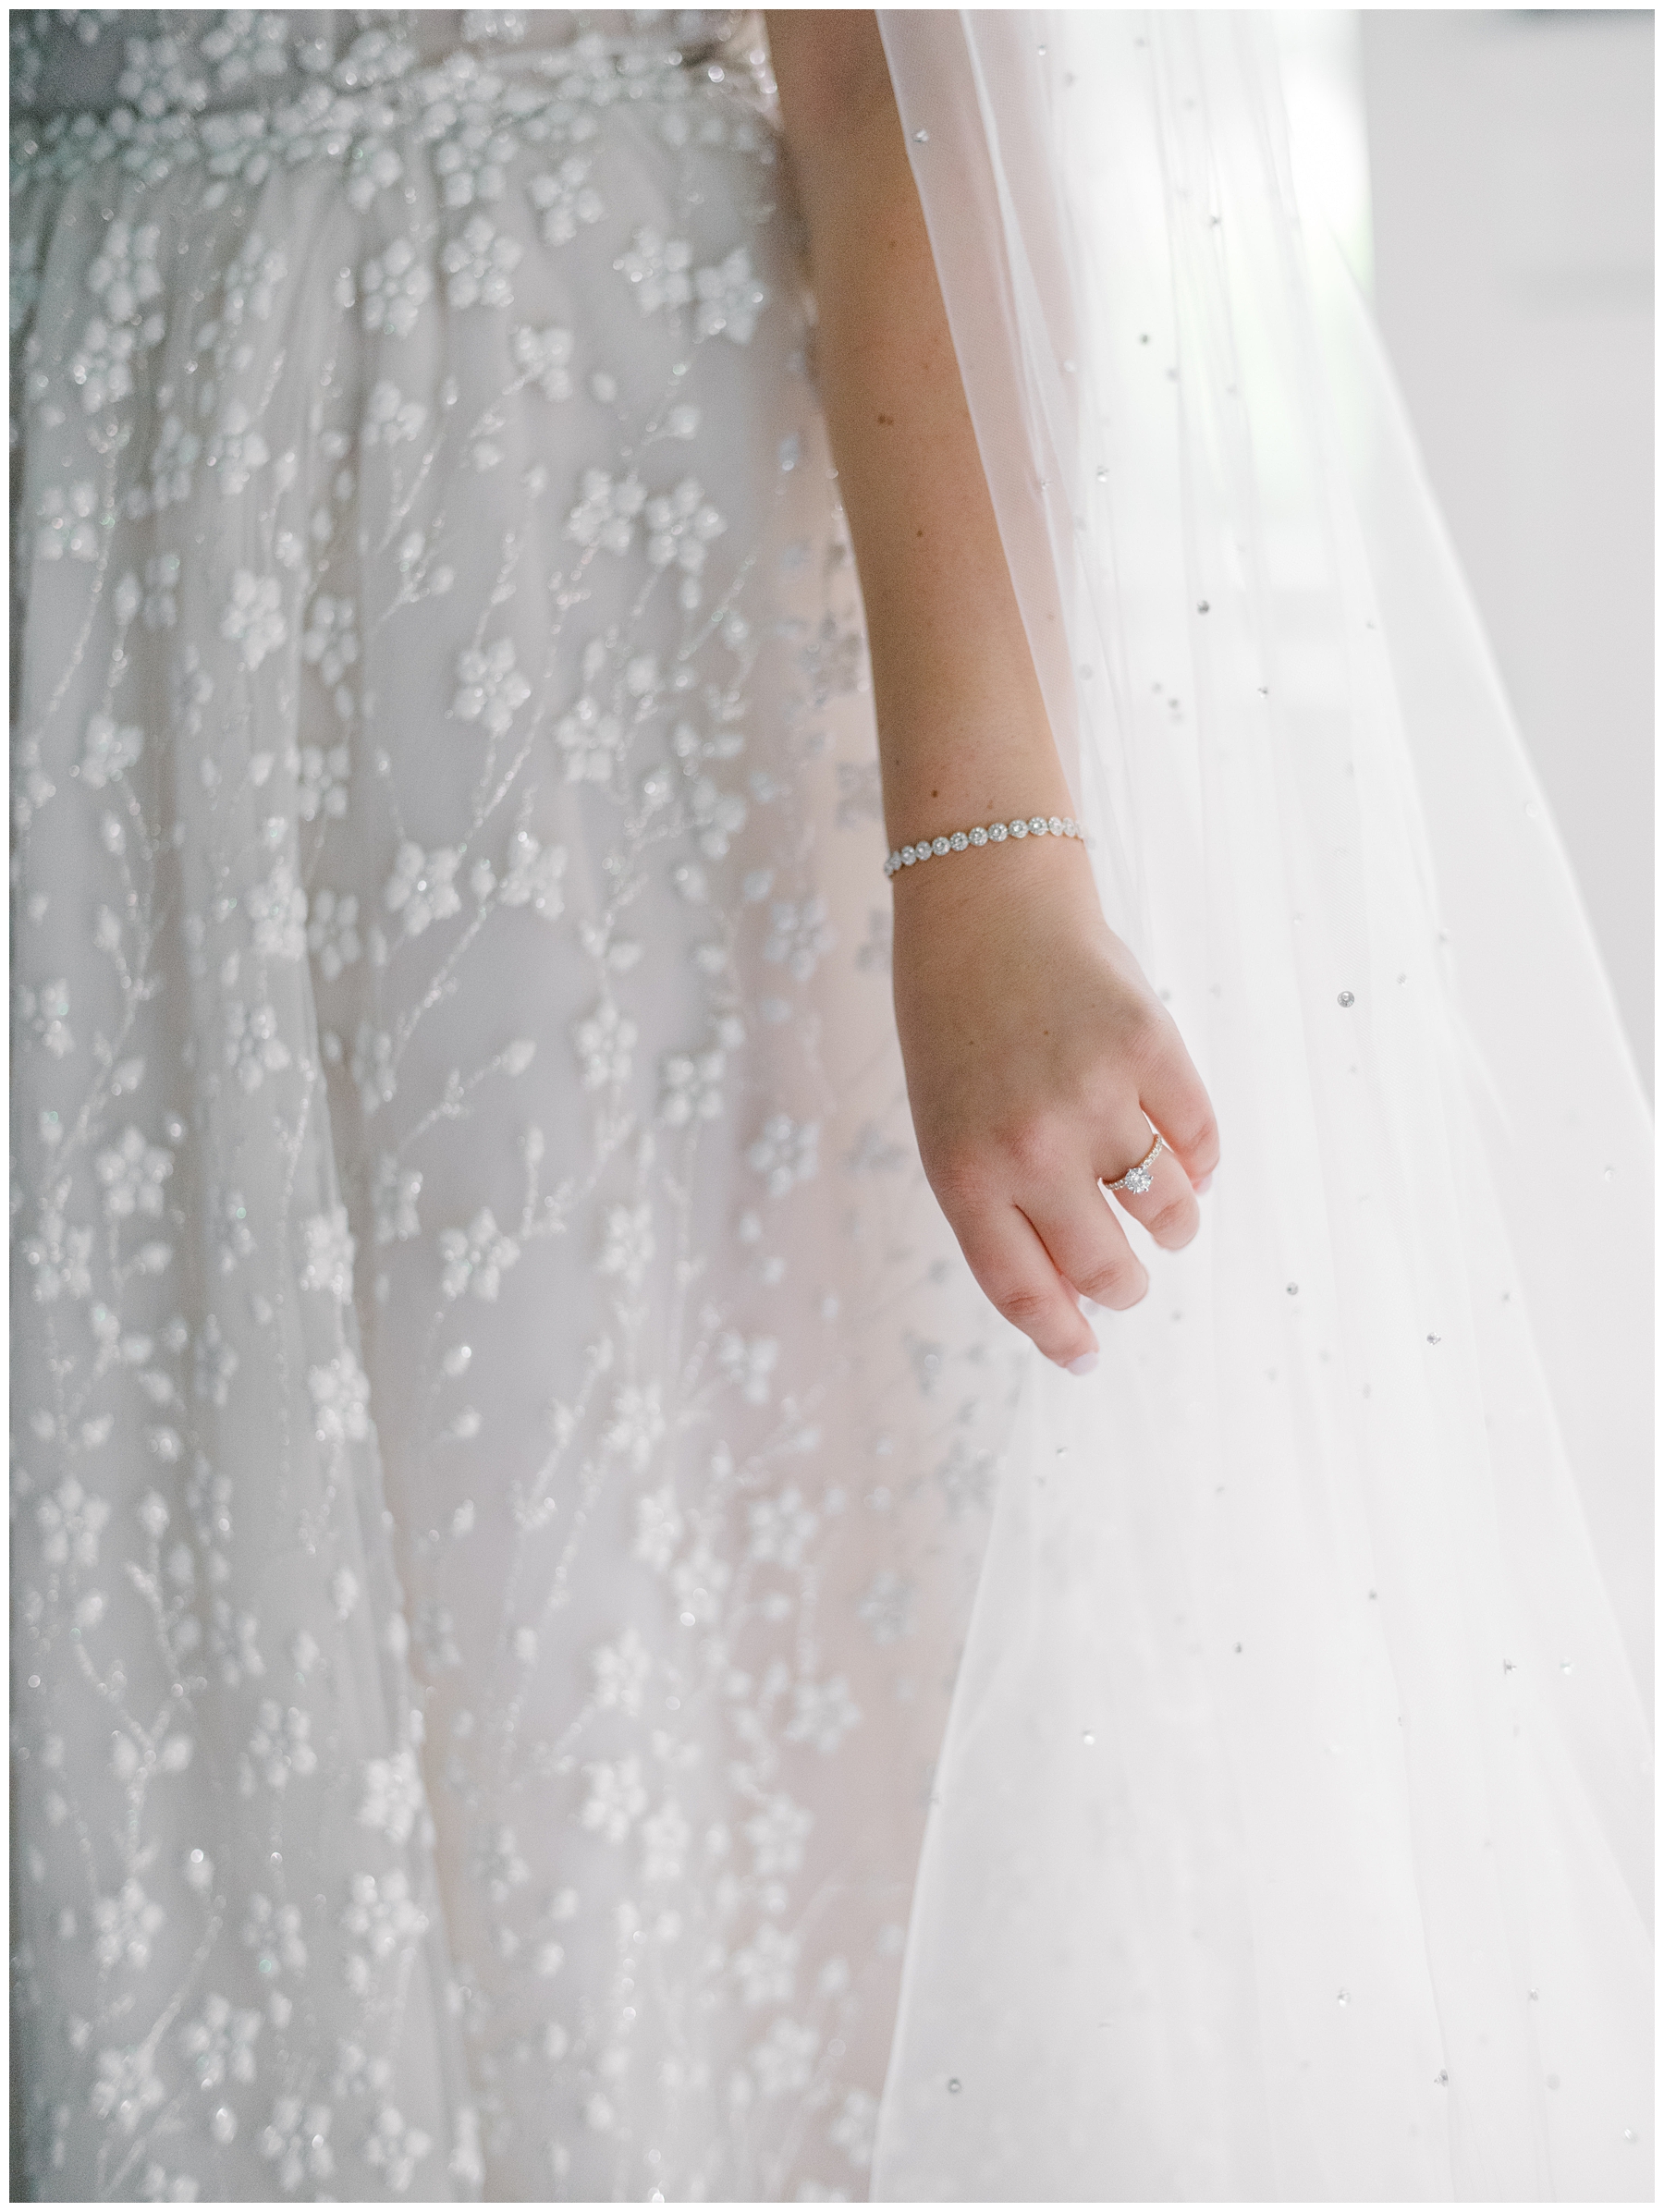 embroidered detail on bride's wedding dress